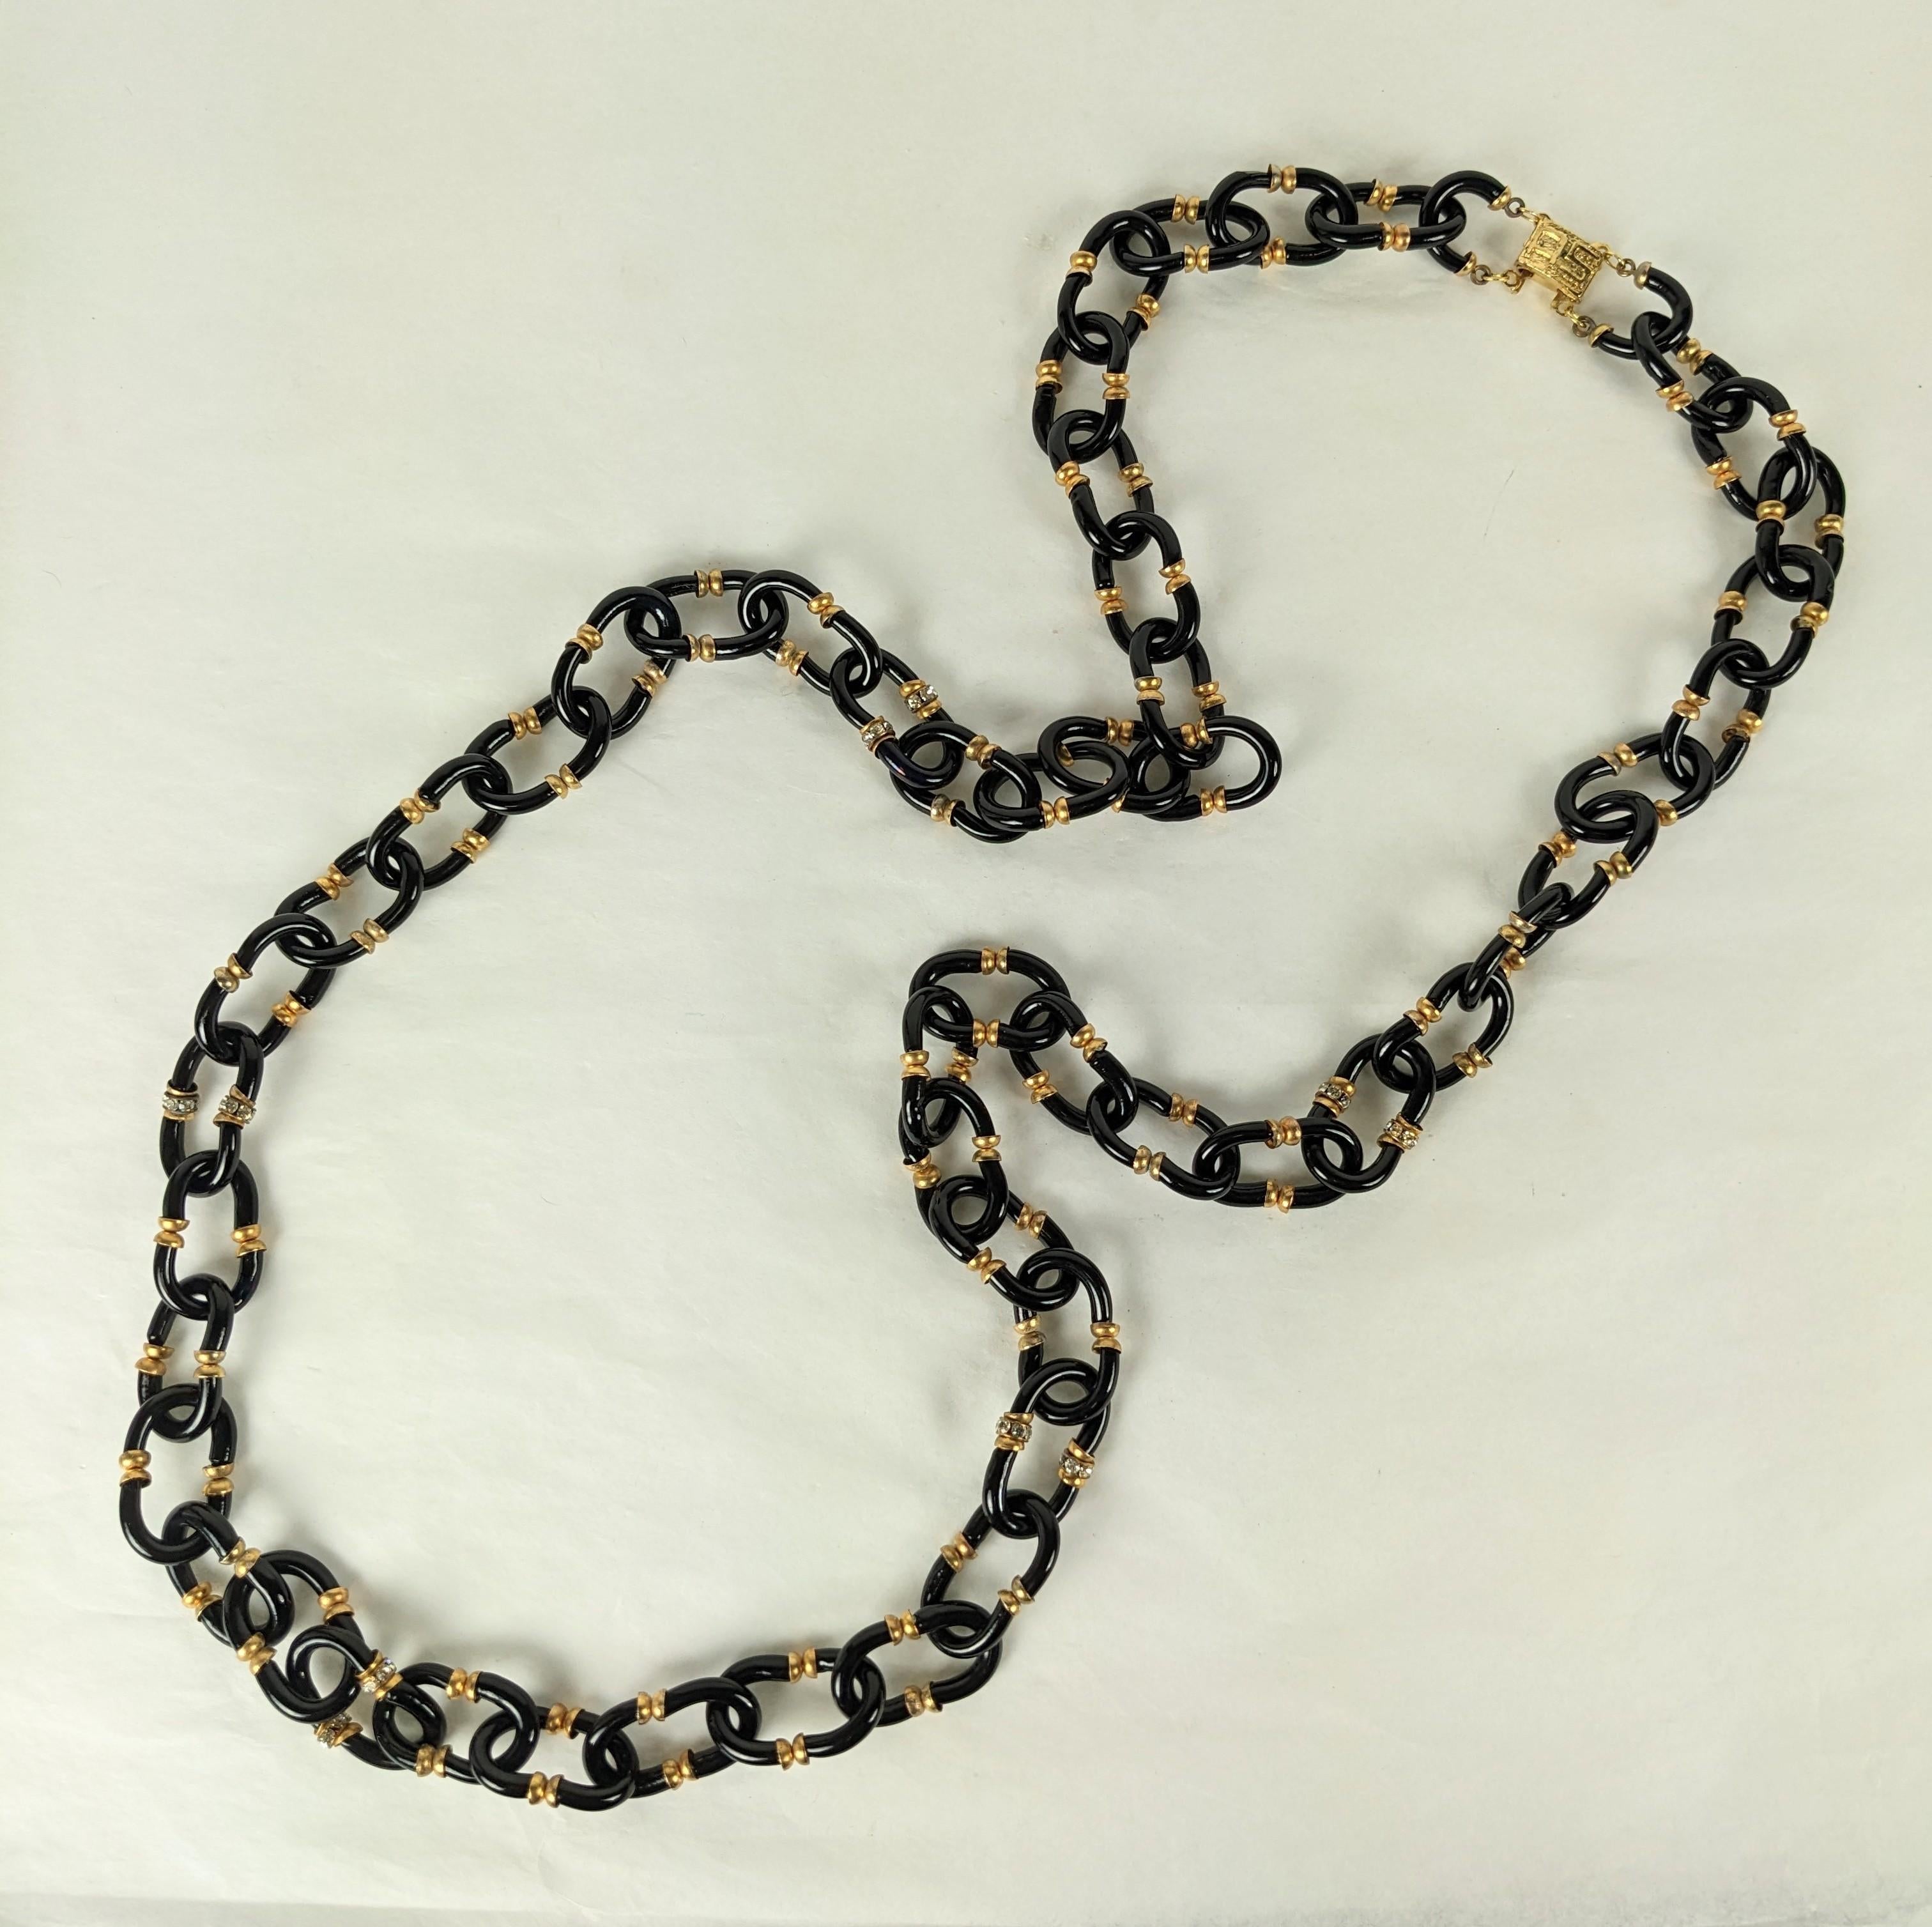 Archimede Seguso for Chanel Glass Link Chain of black glass links with metal spacers and pave rhinestone rondels. The glass links have interior metal wires and are quite strong. Archimede Seguso logo clasp 